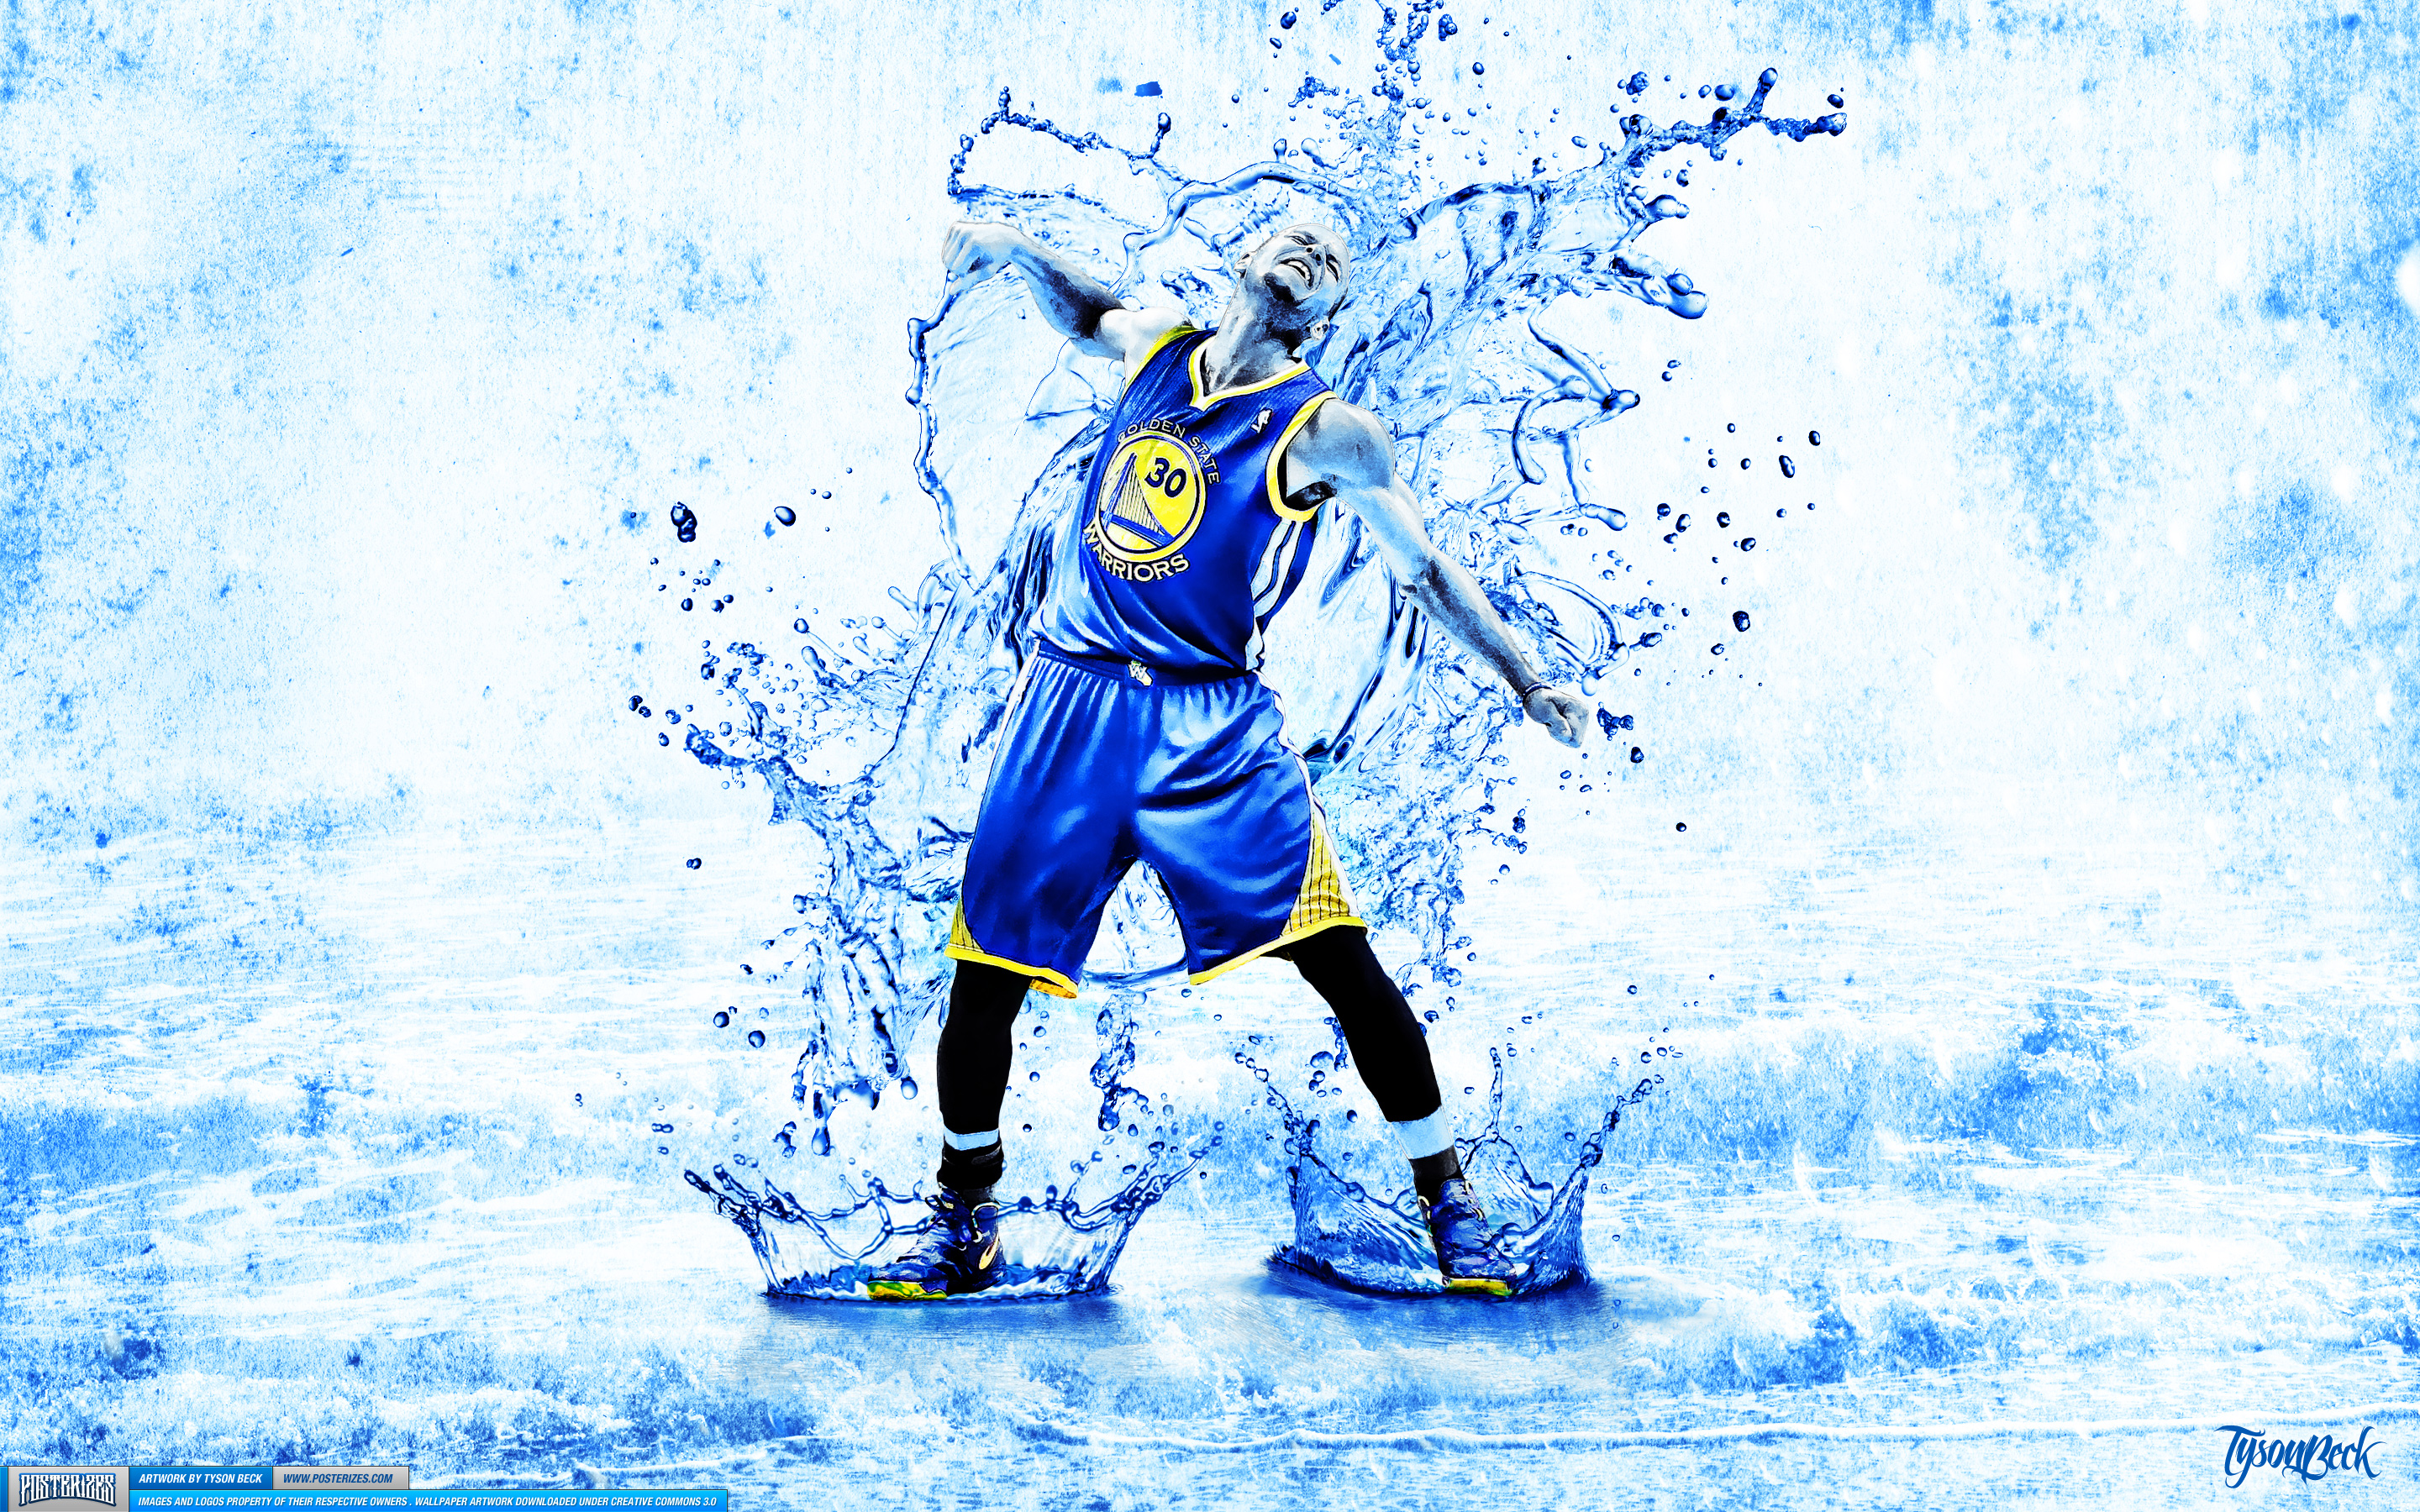 Download wallpapers 4k, Stephen Curry, abstract art, basketball stars, NBA,  Golden State Warriors, Curry, basketball, neon lights, creative for desktop  free. Pi…